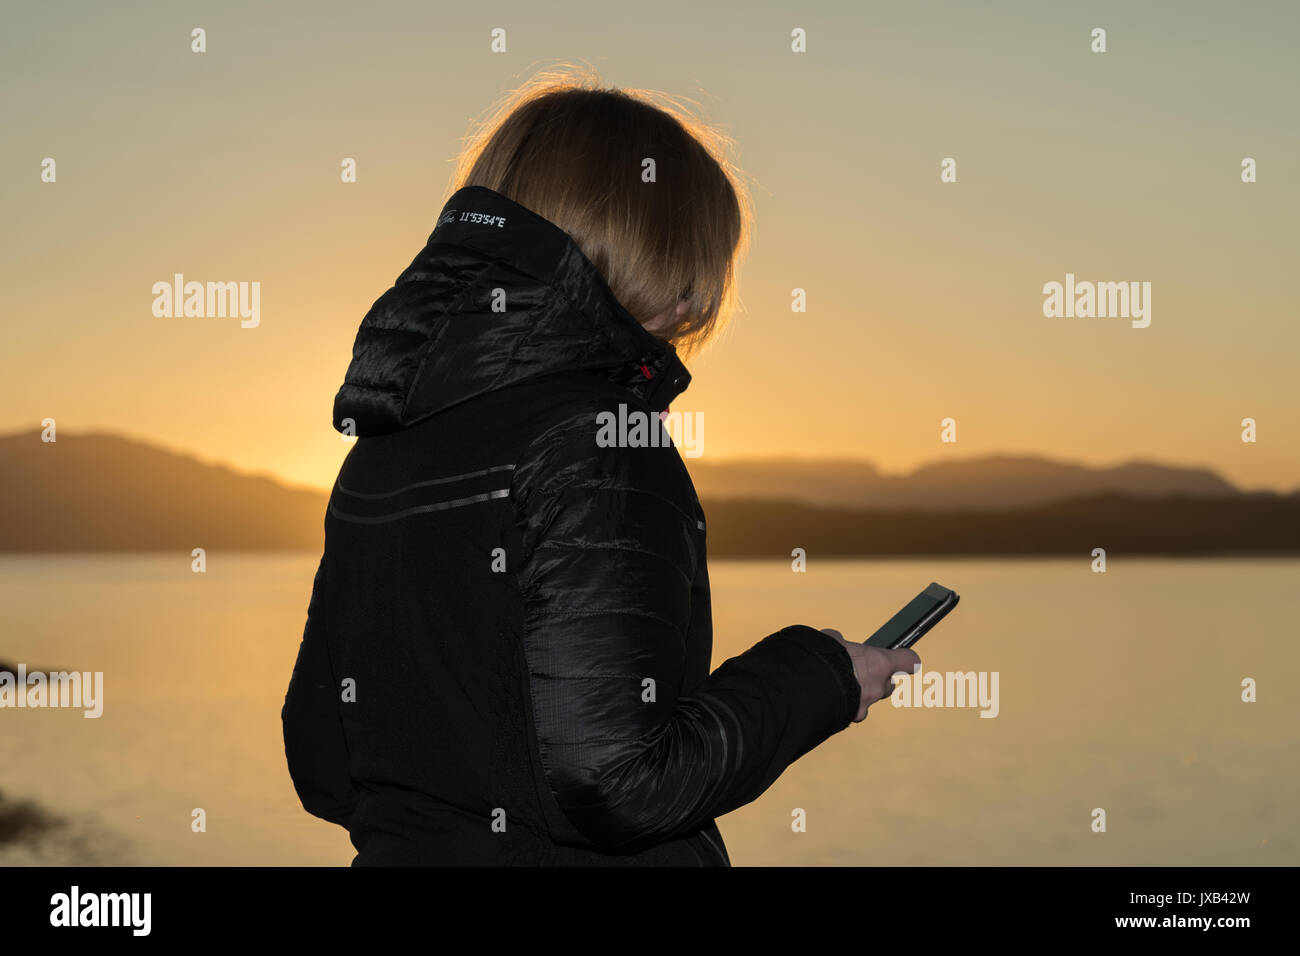 Woman texting on phone in sunset Stock Photo